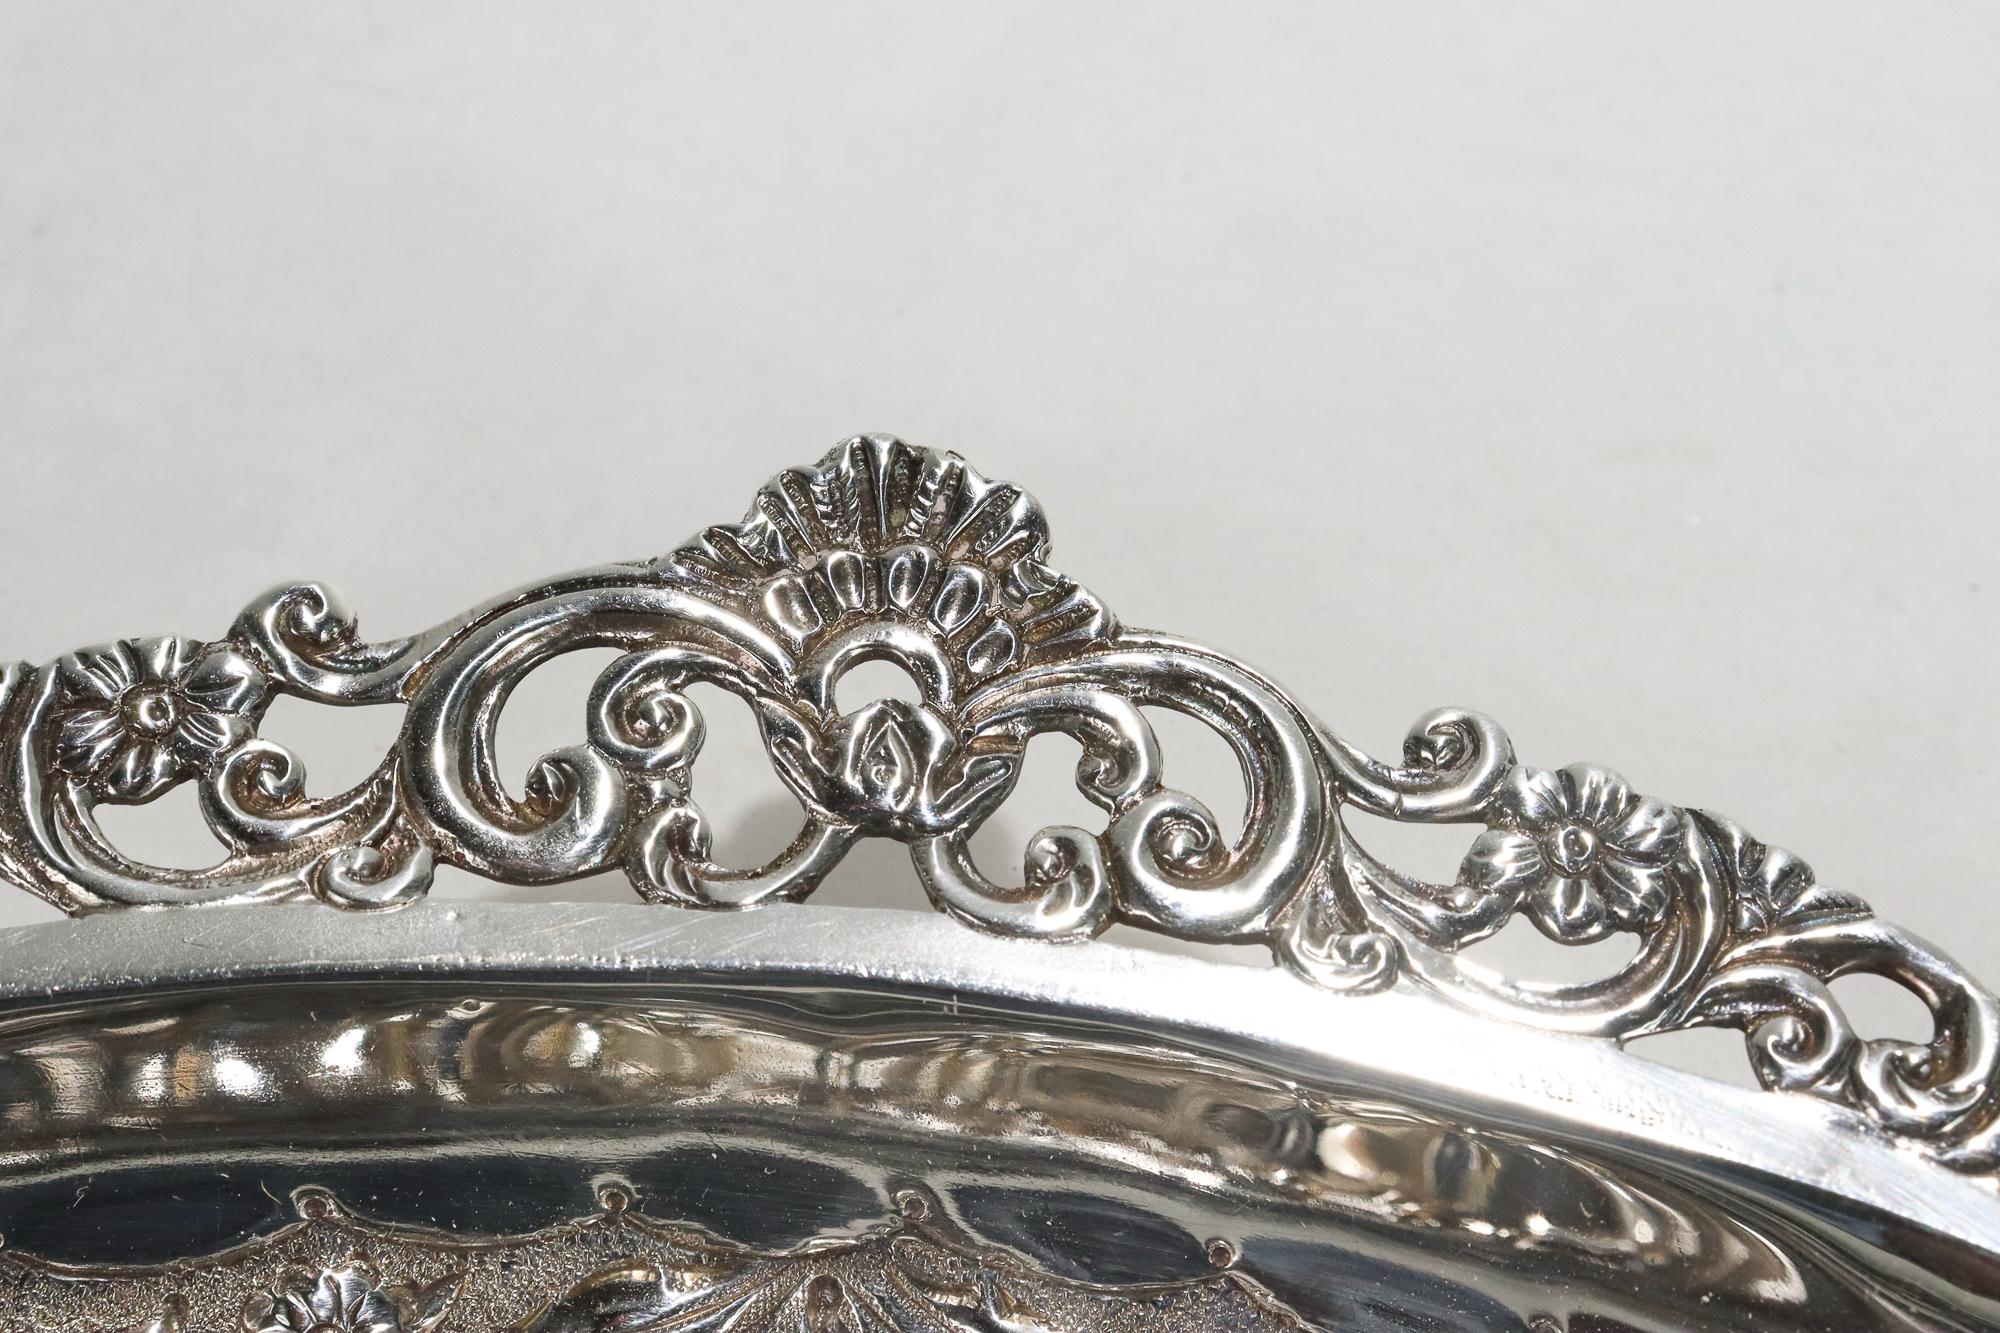 Antique Mappin & Webb Ornate Reticulated Repousse Sterling Silver Dresser Tray For Sale 2